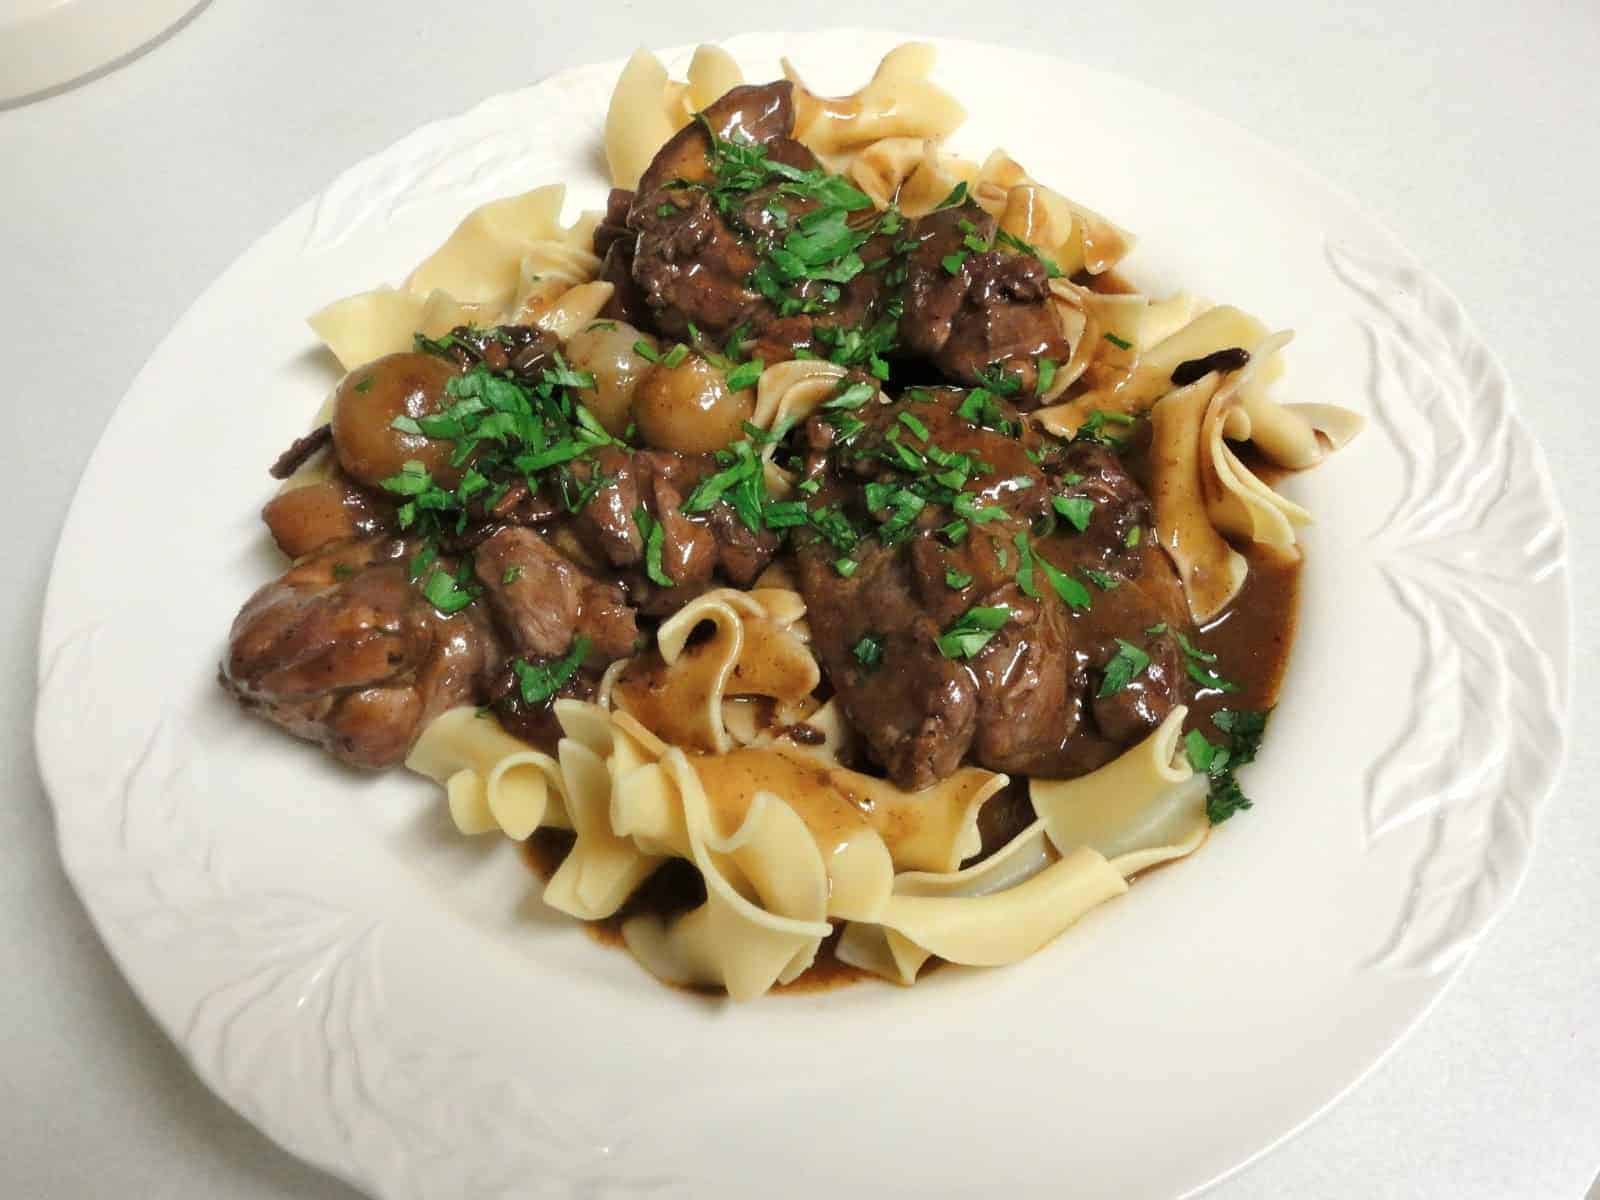 90 Minute Coq au Vin from Cook’s Illustrated